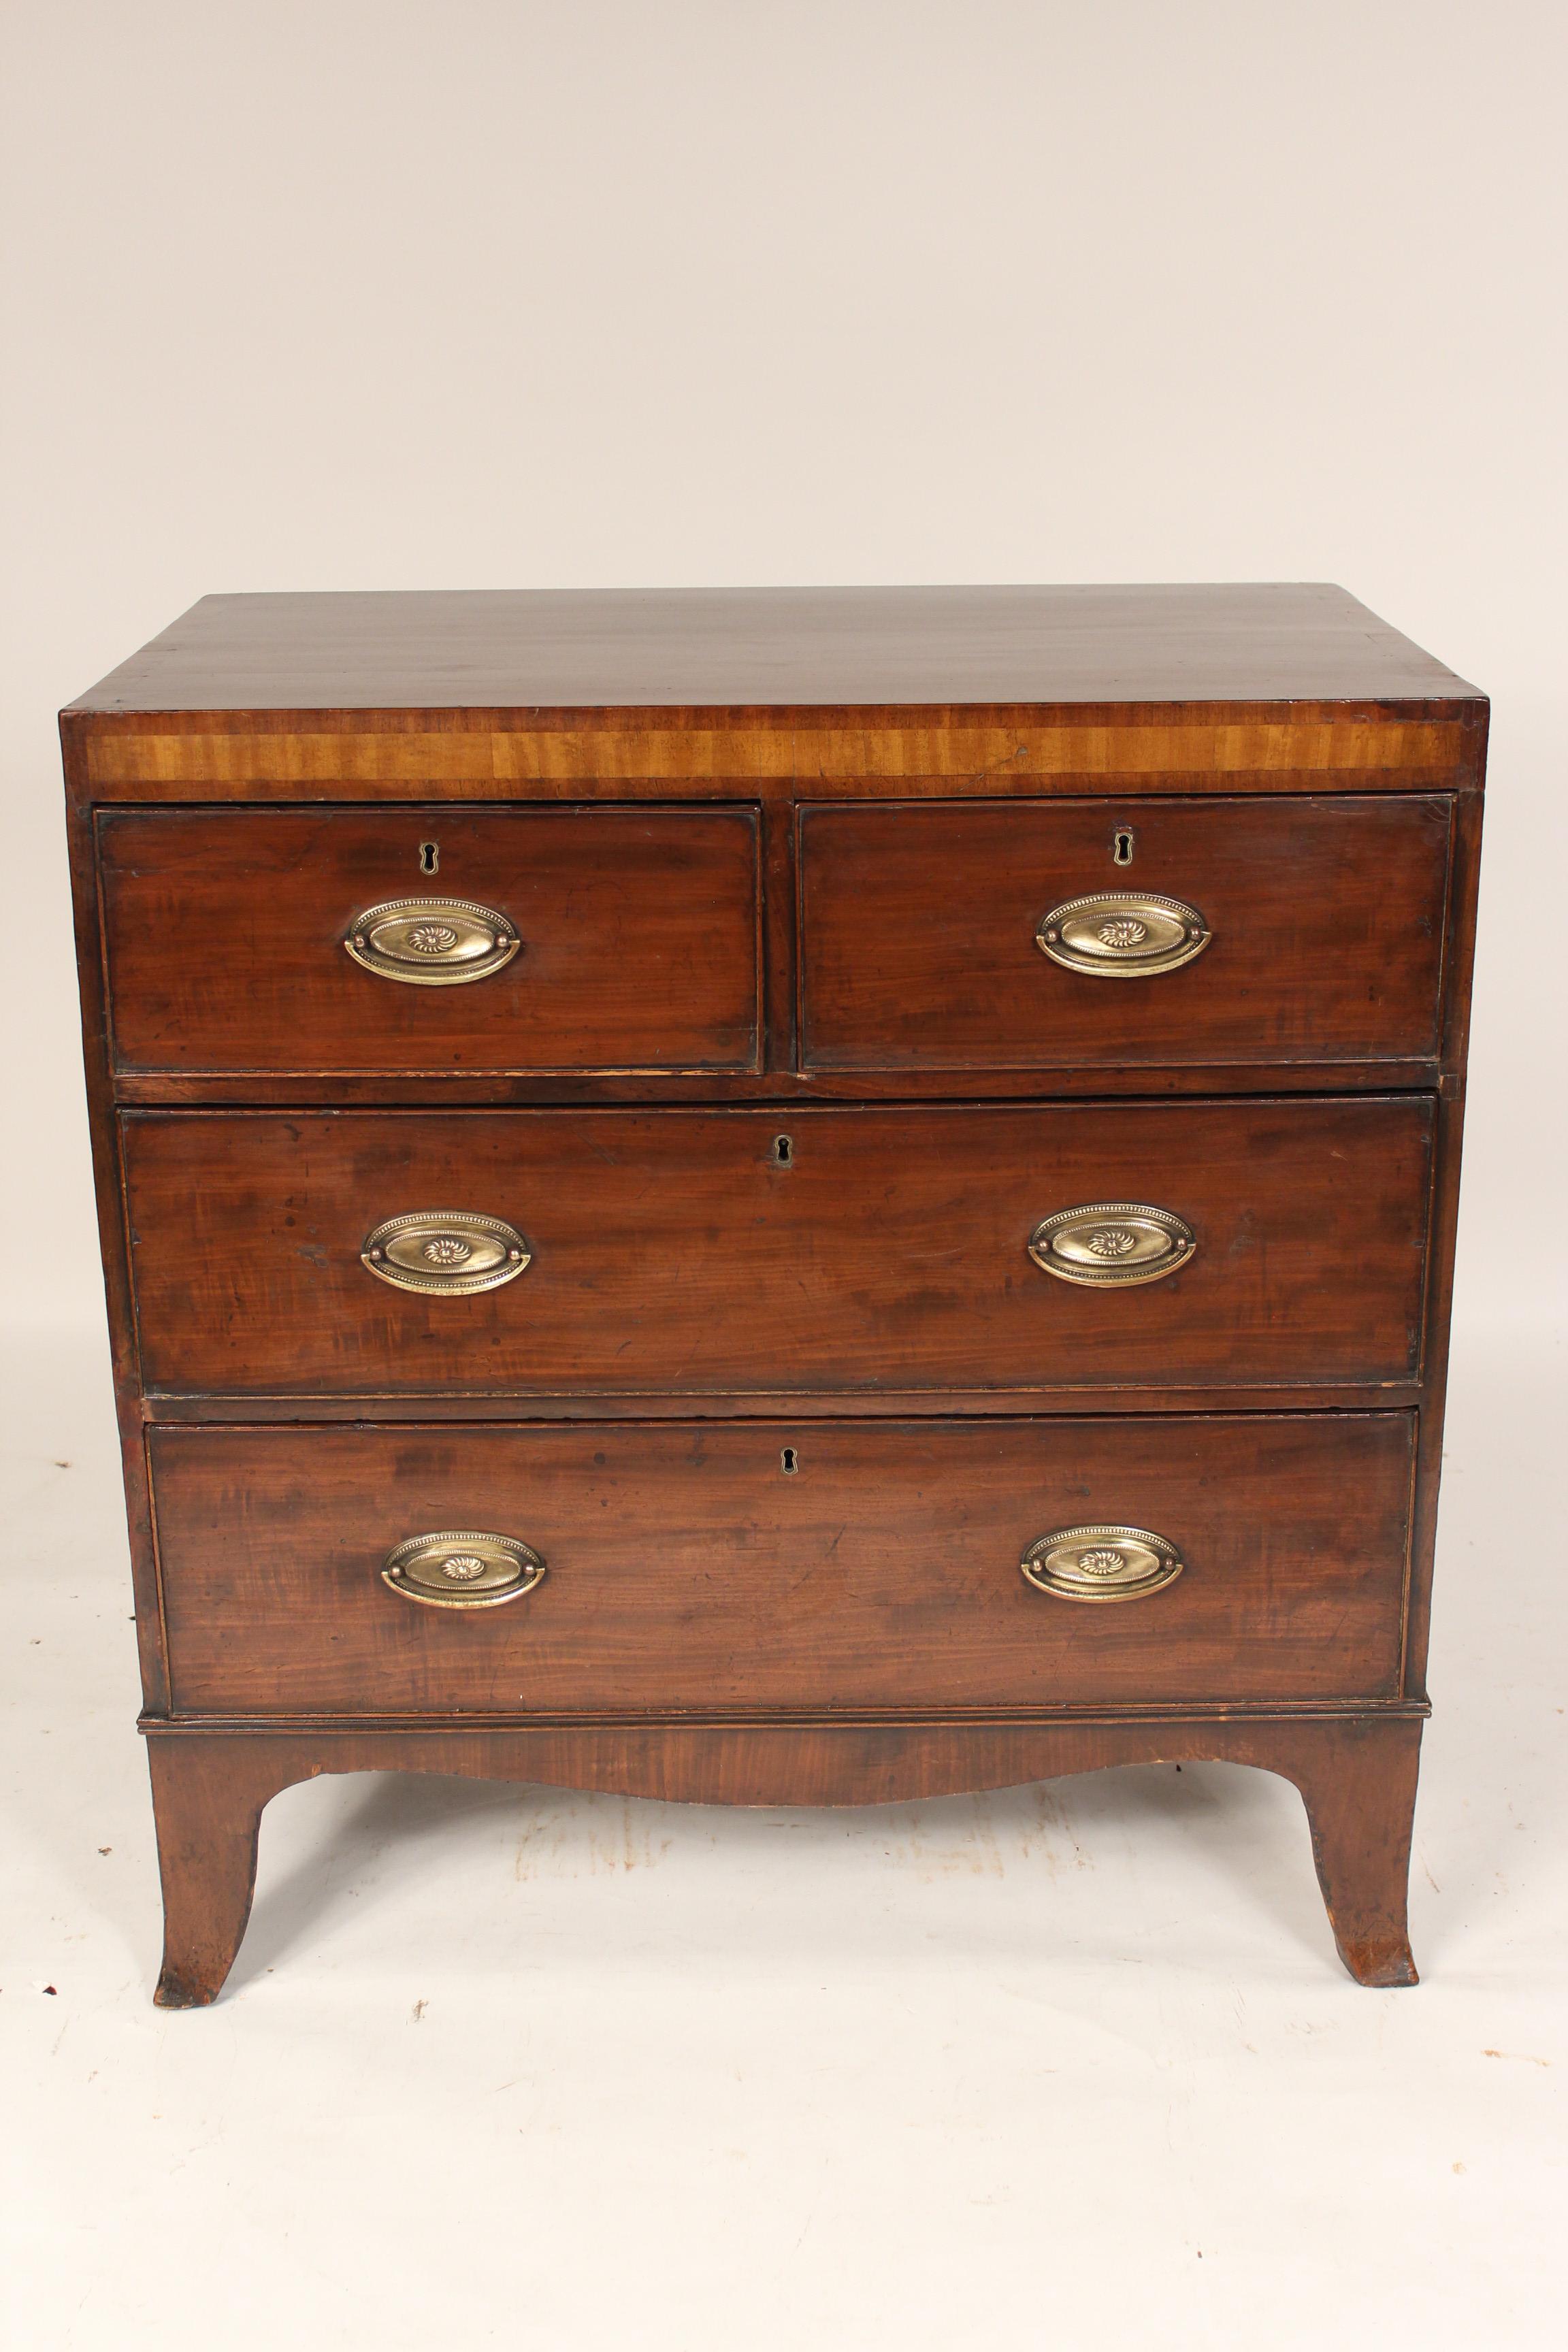 George III mahogany chest of drawers with a satin wood frieze, circa 1800.